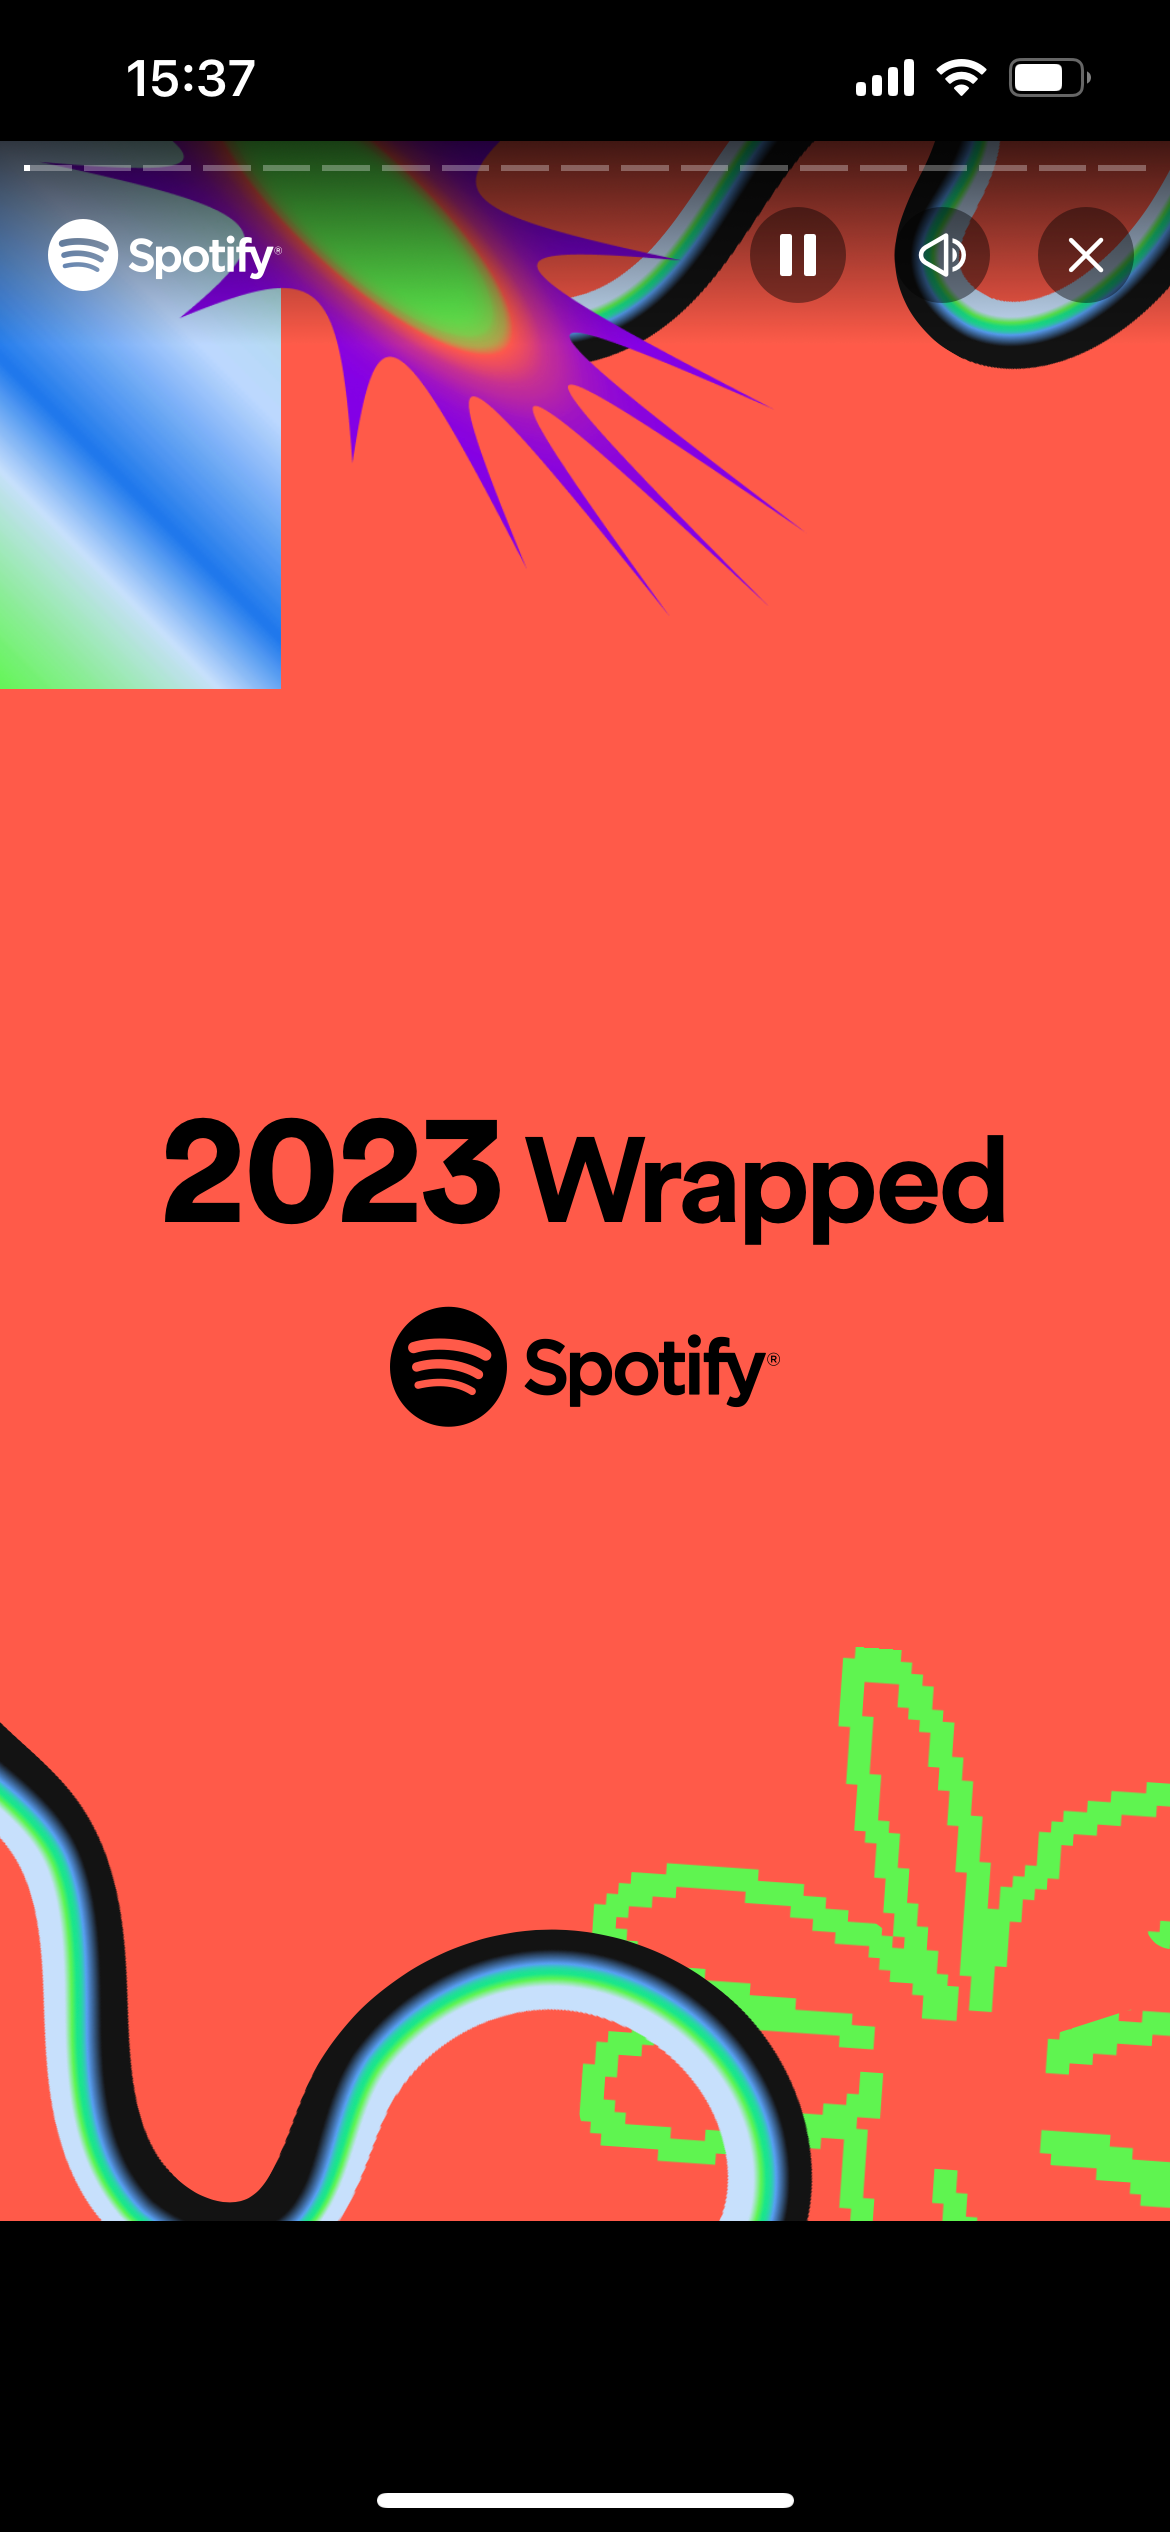 How to get your Spotify Wrapped 2023